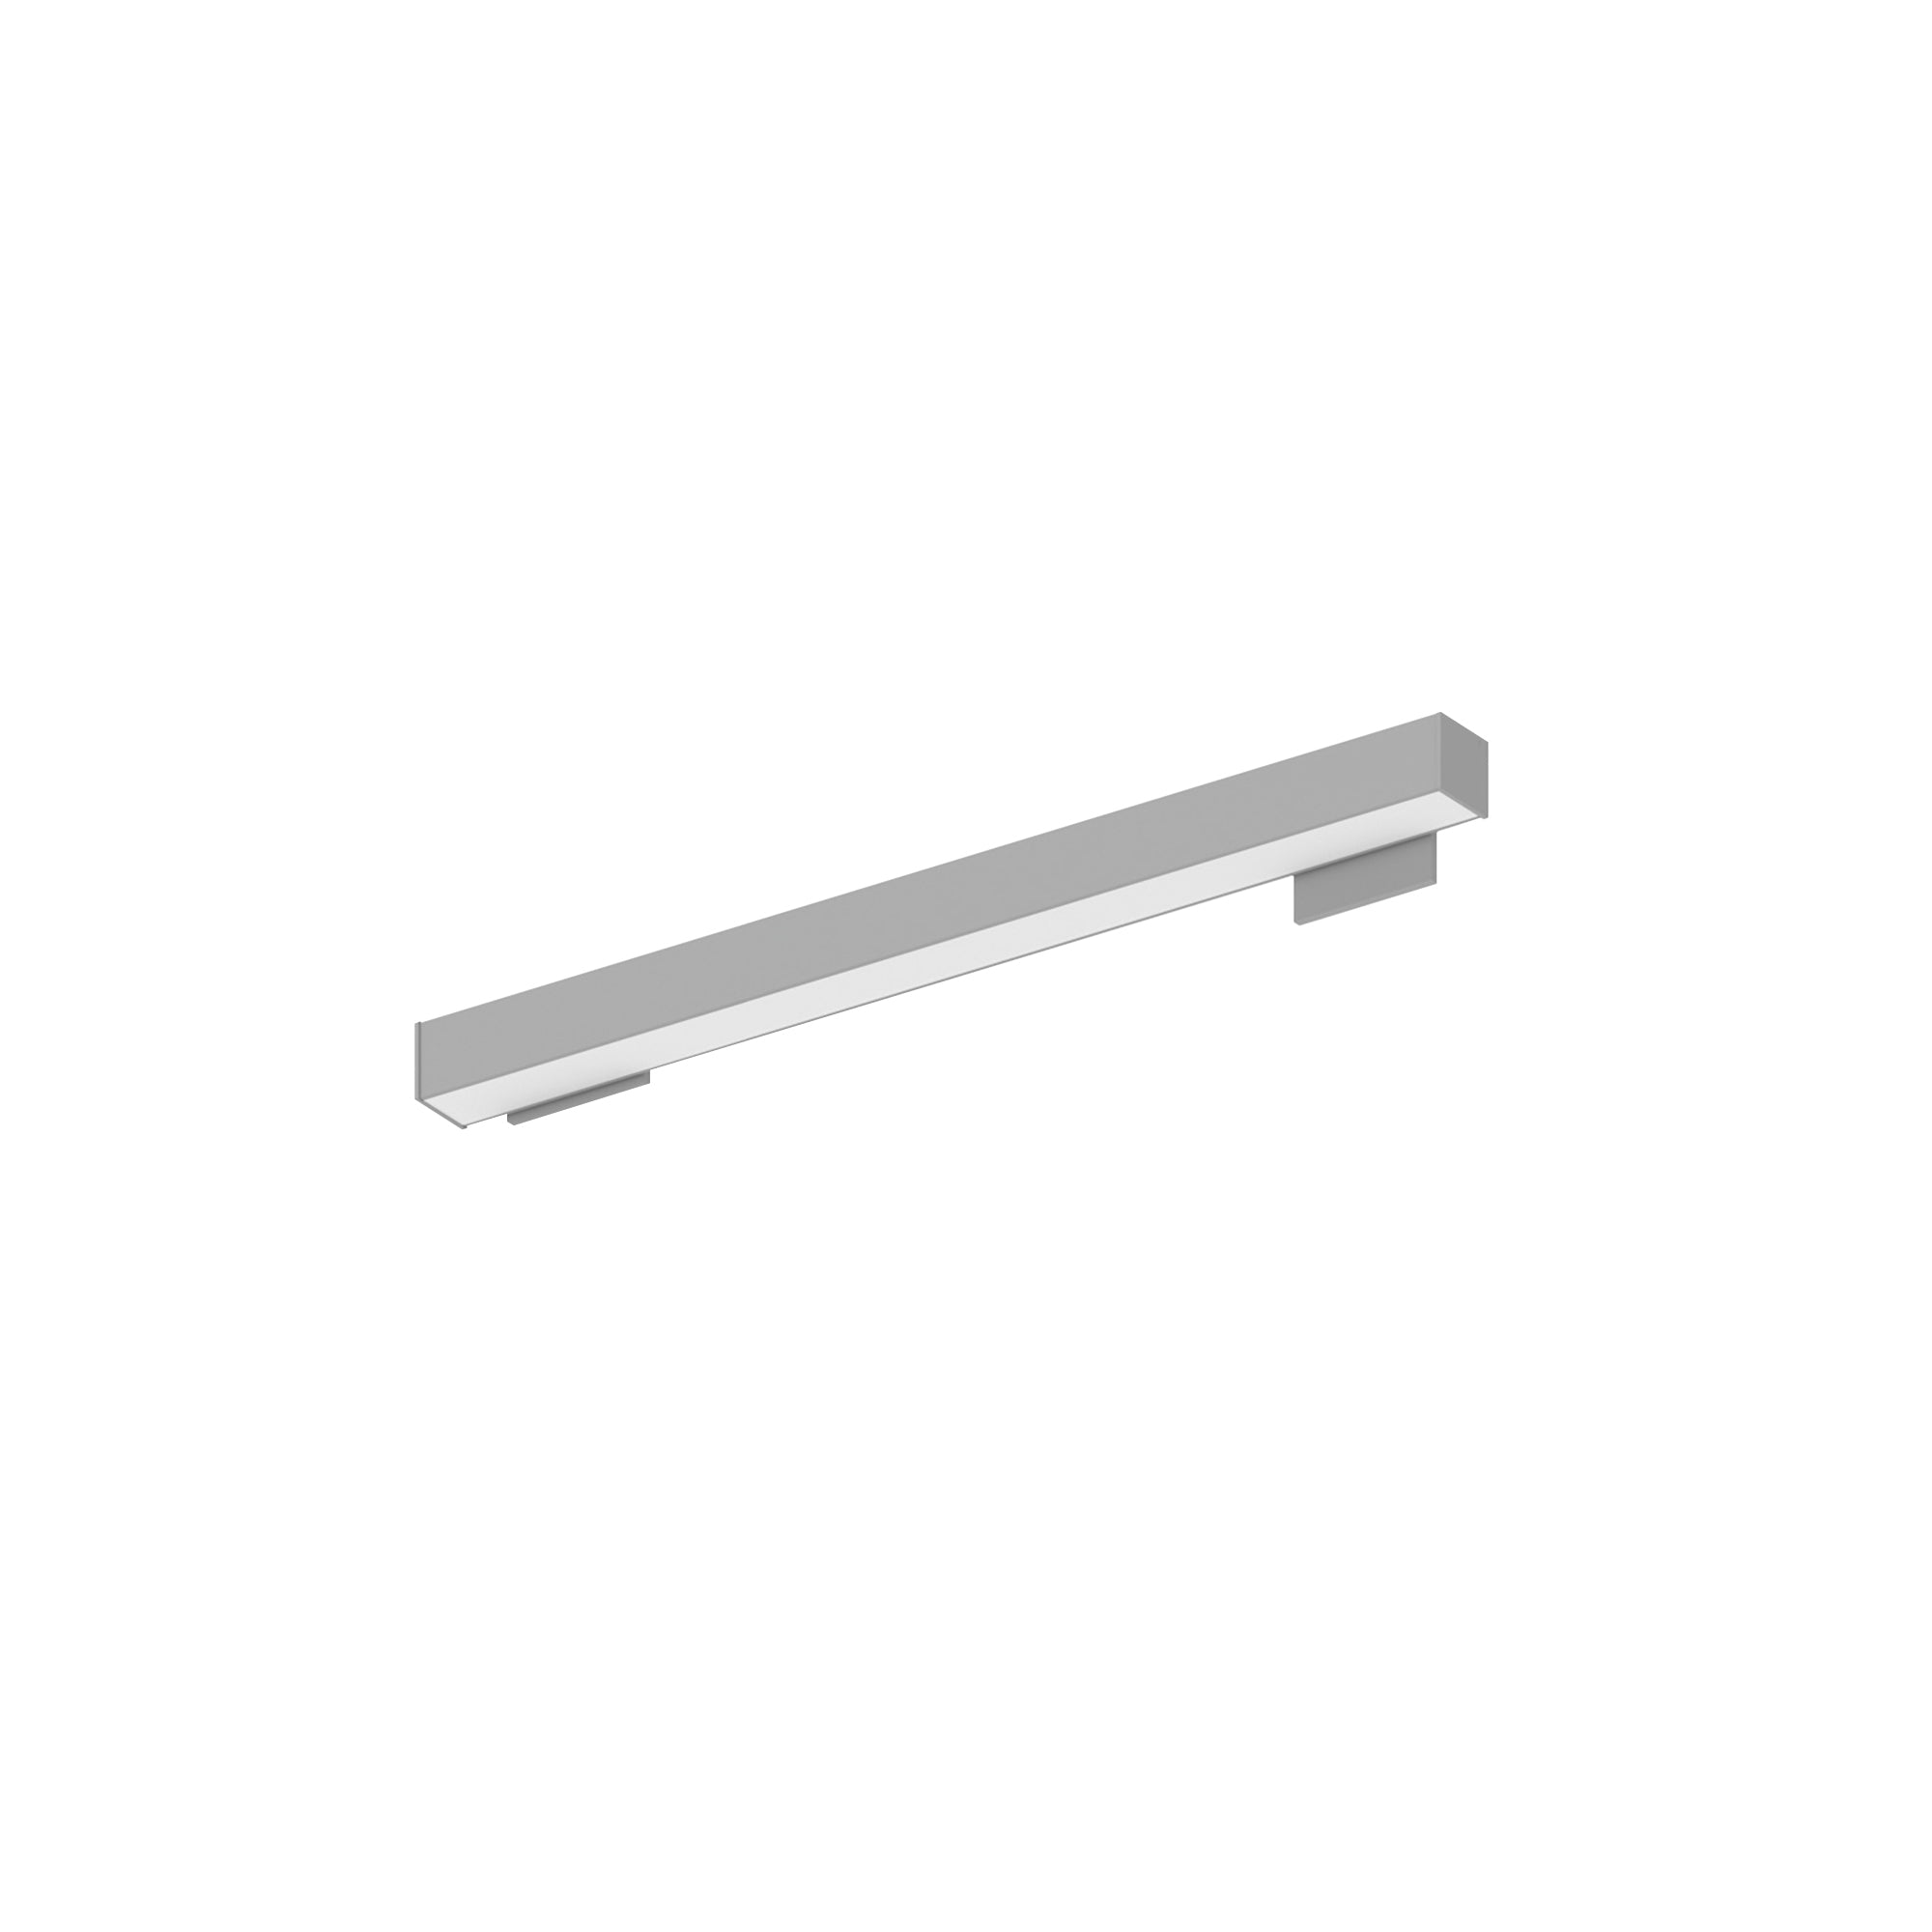 Nora Lighting NWLIN-21040A/L2-R4 - Linear - 2' L-Line LED Wall Mount Linear, 2100lm / 4000K, 2 Inchx4 Inch Left Plate & 4 Inchx4 Inch Right Plate, Aluminum Finish